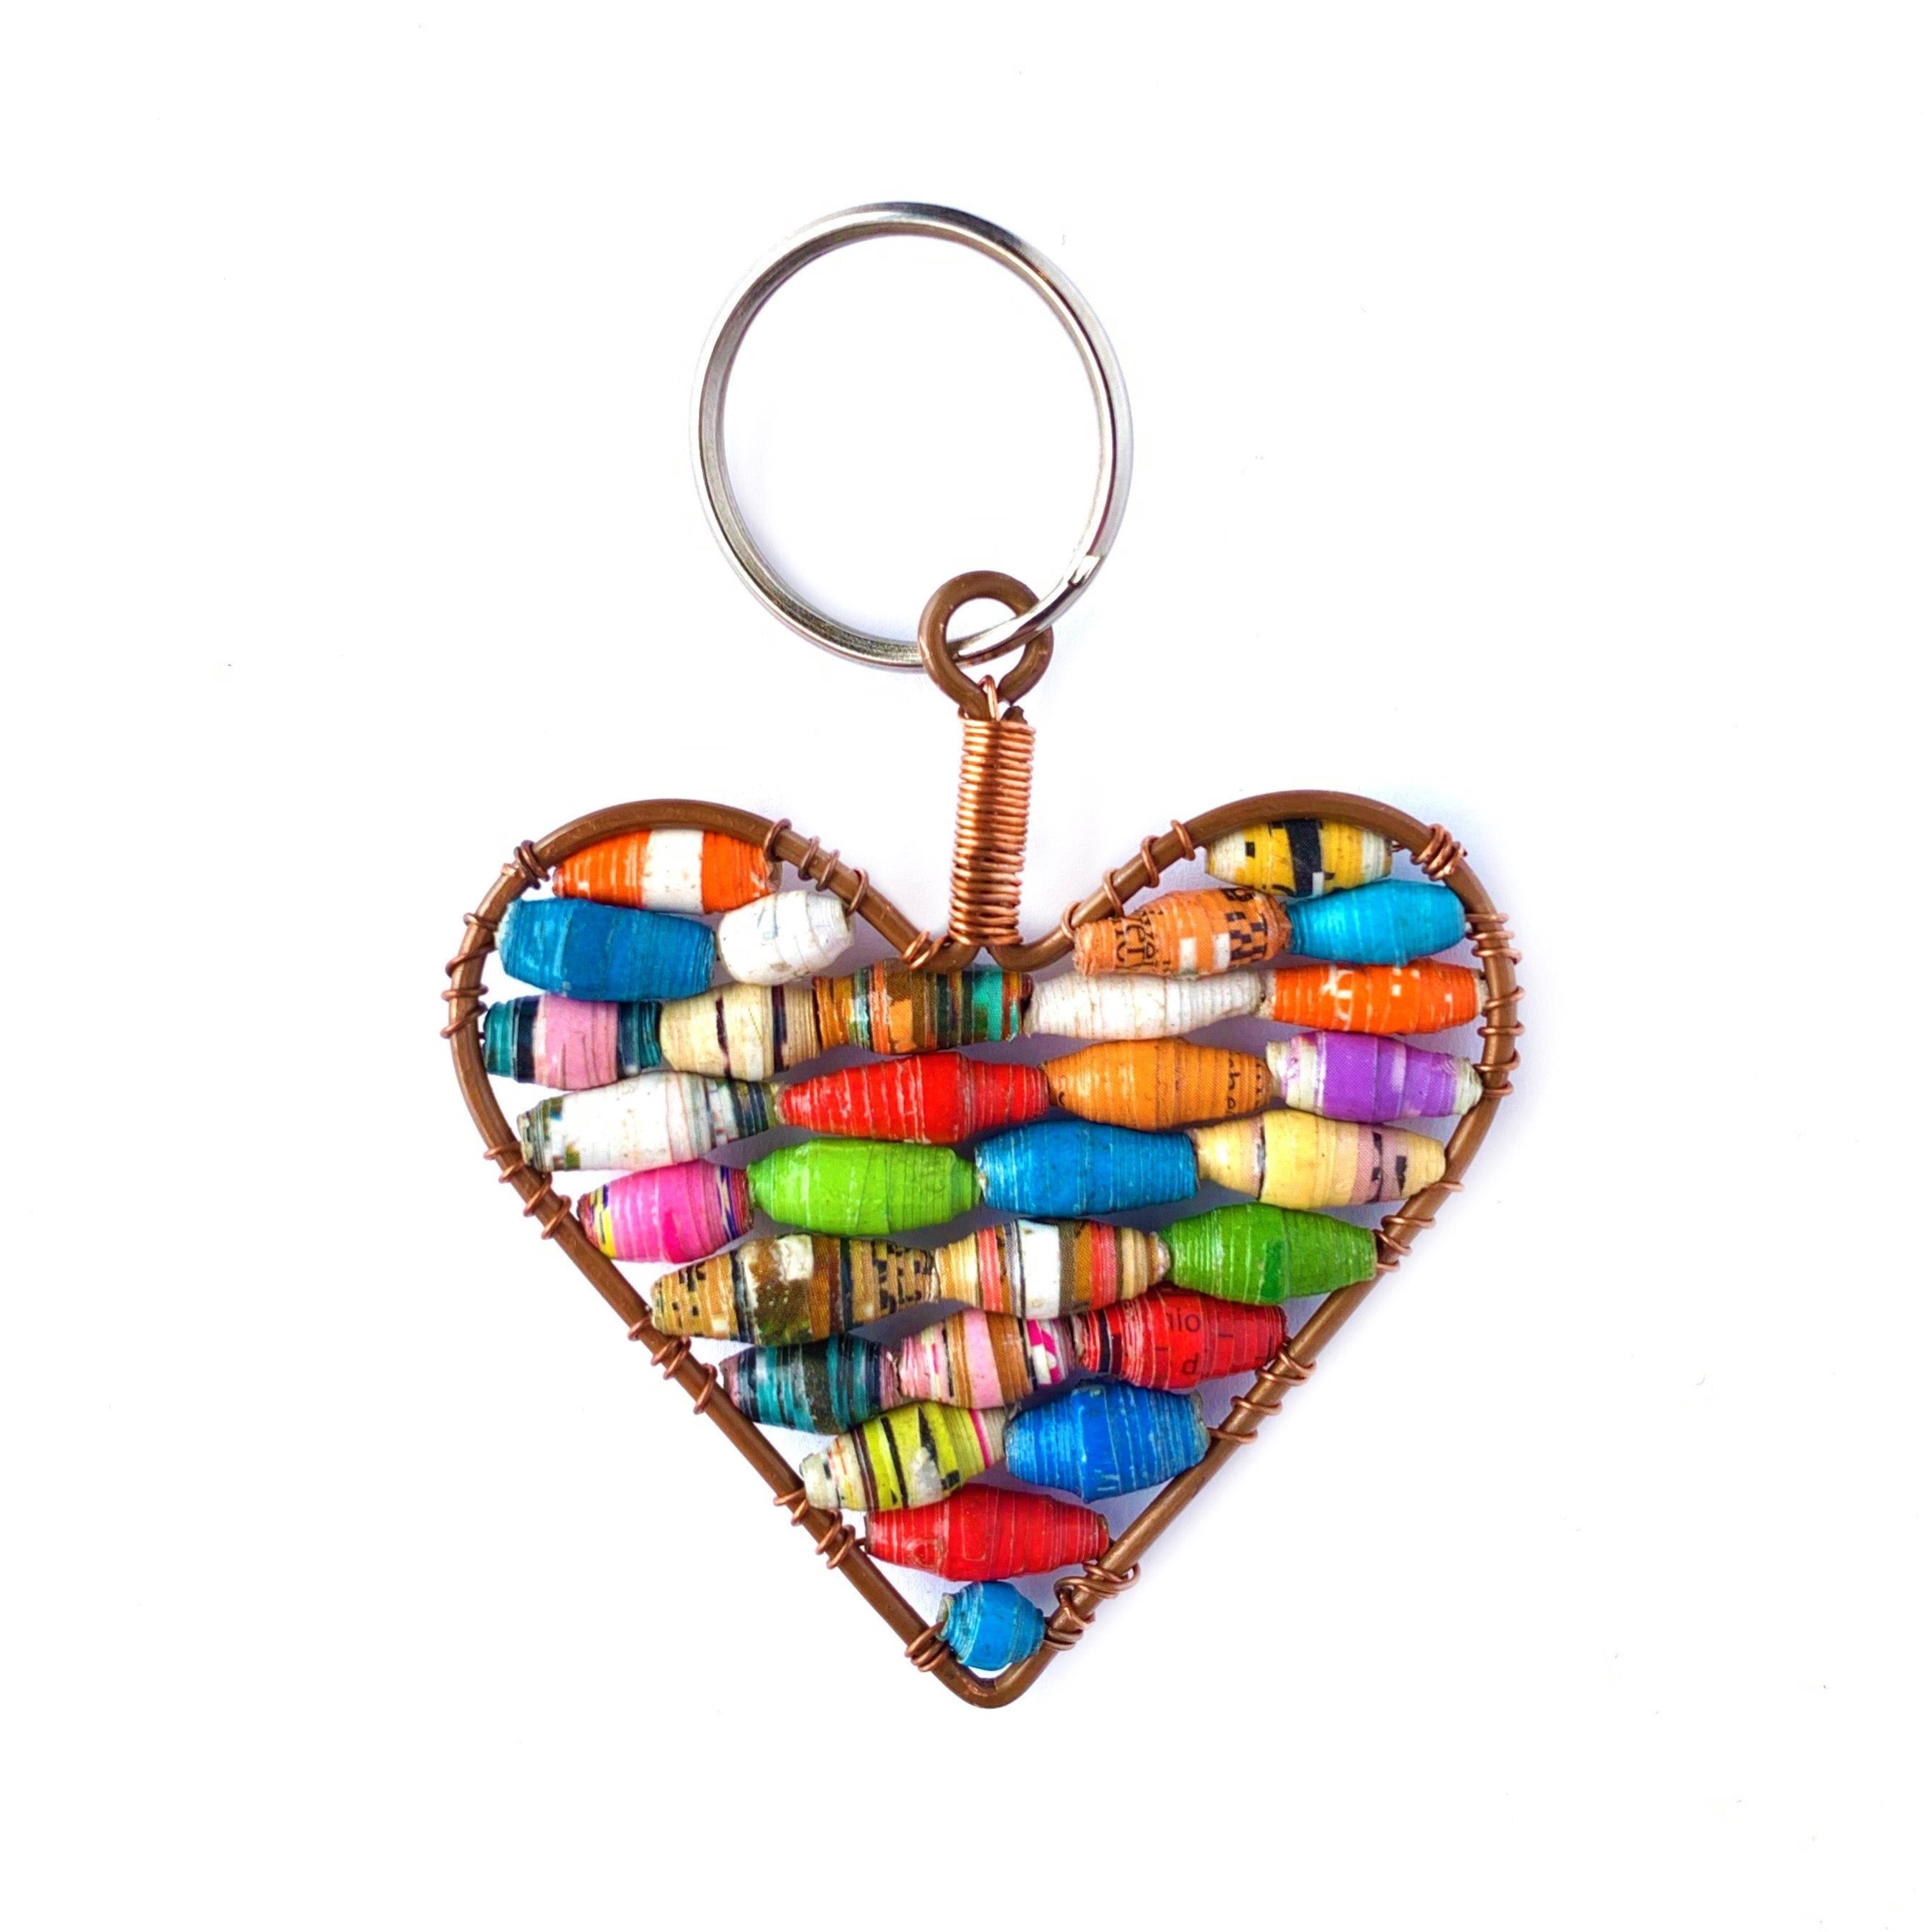 100 Colorful Heart Beads,small Bright Heart Beads for DIY Keychain